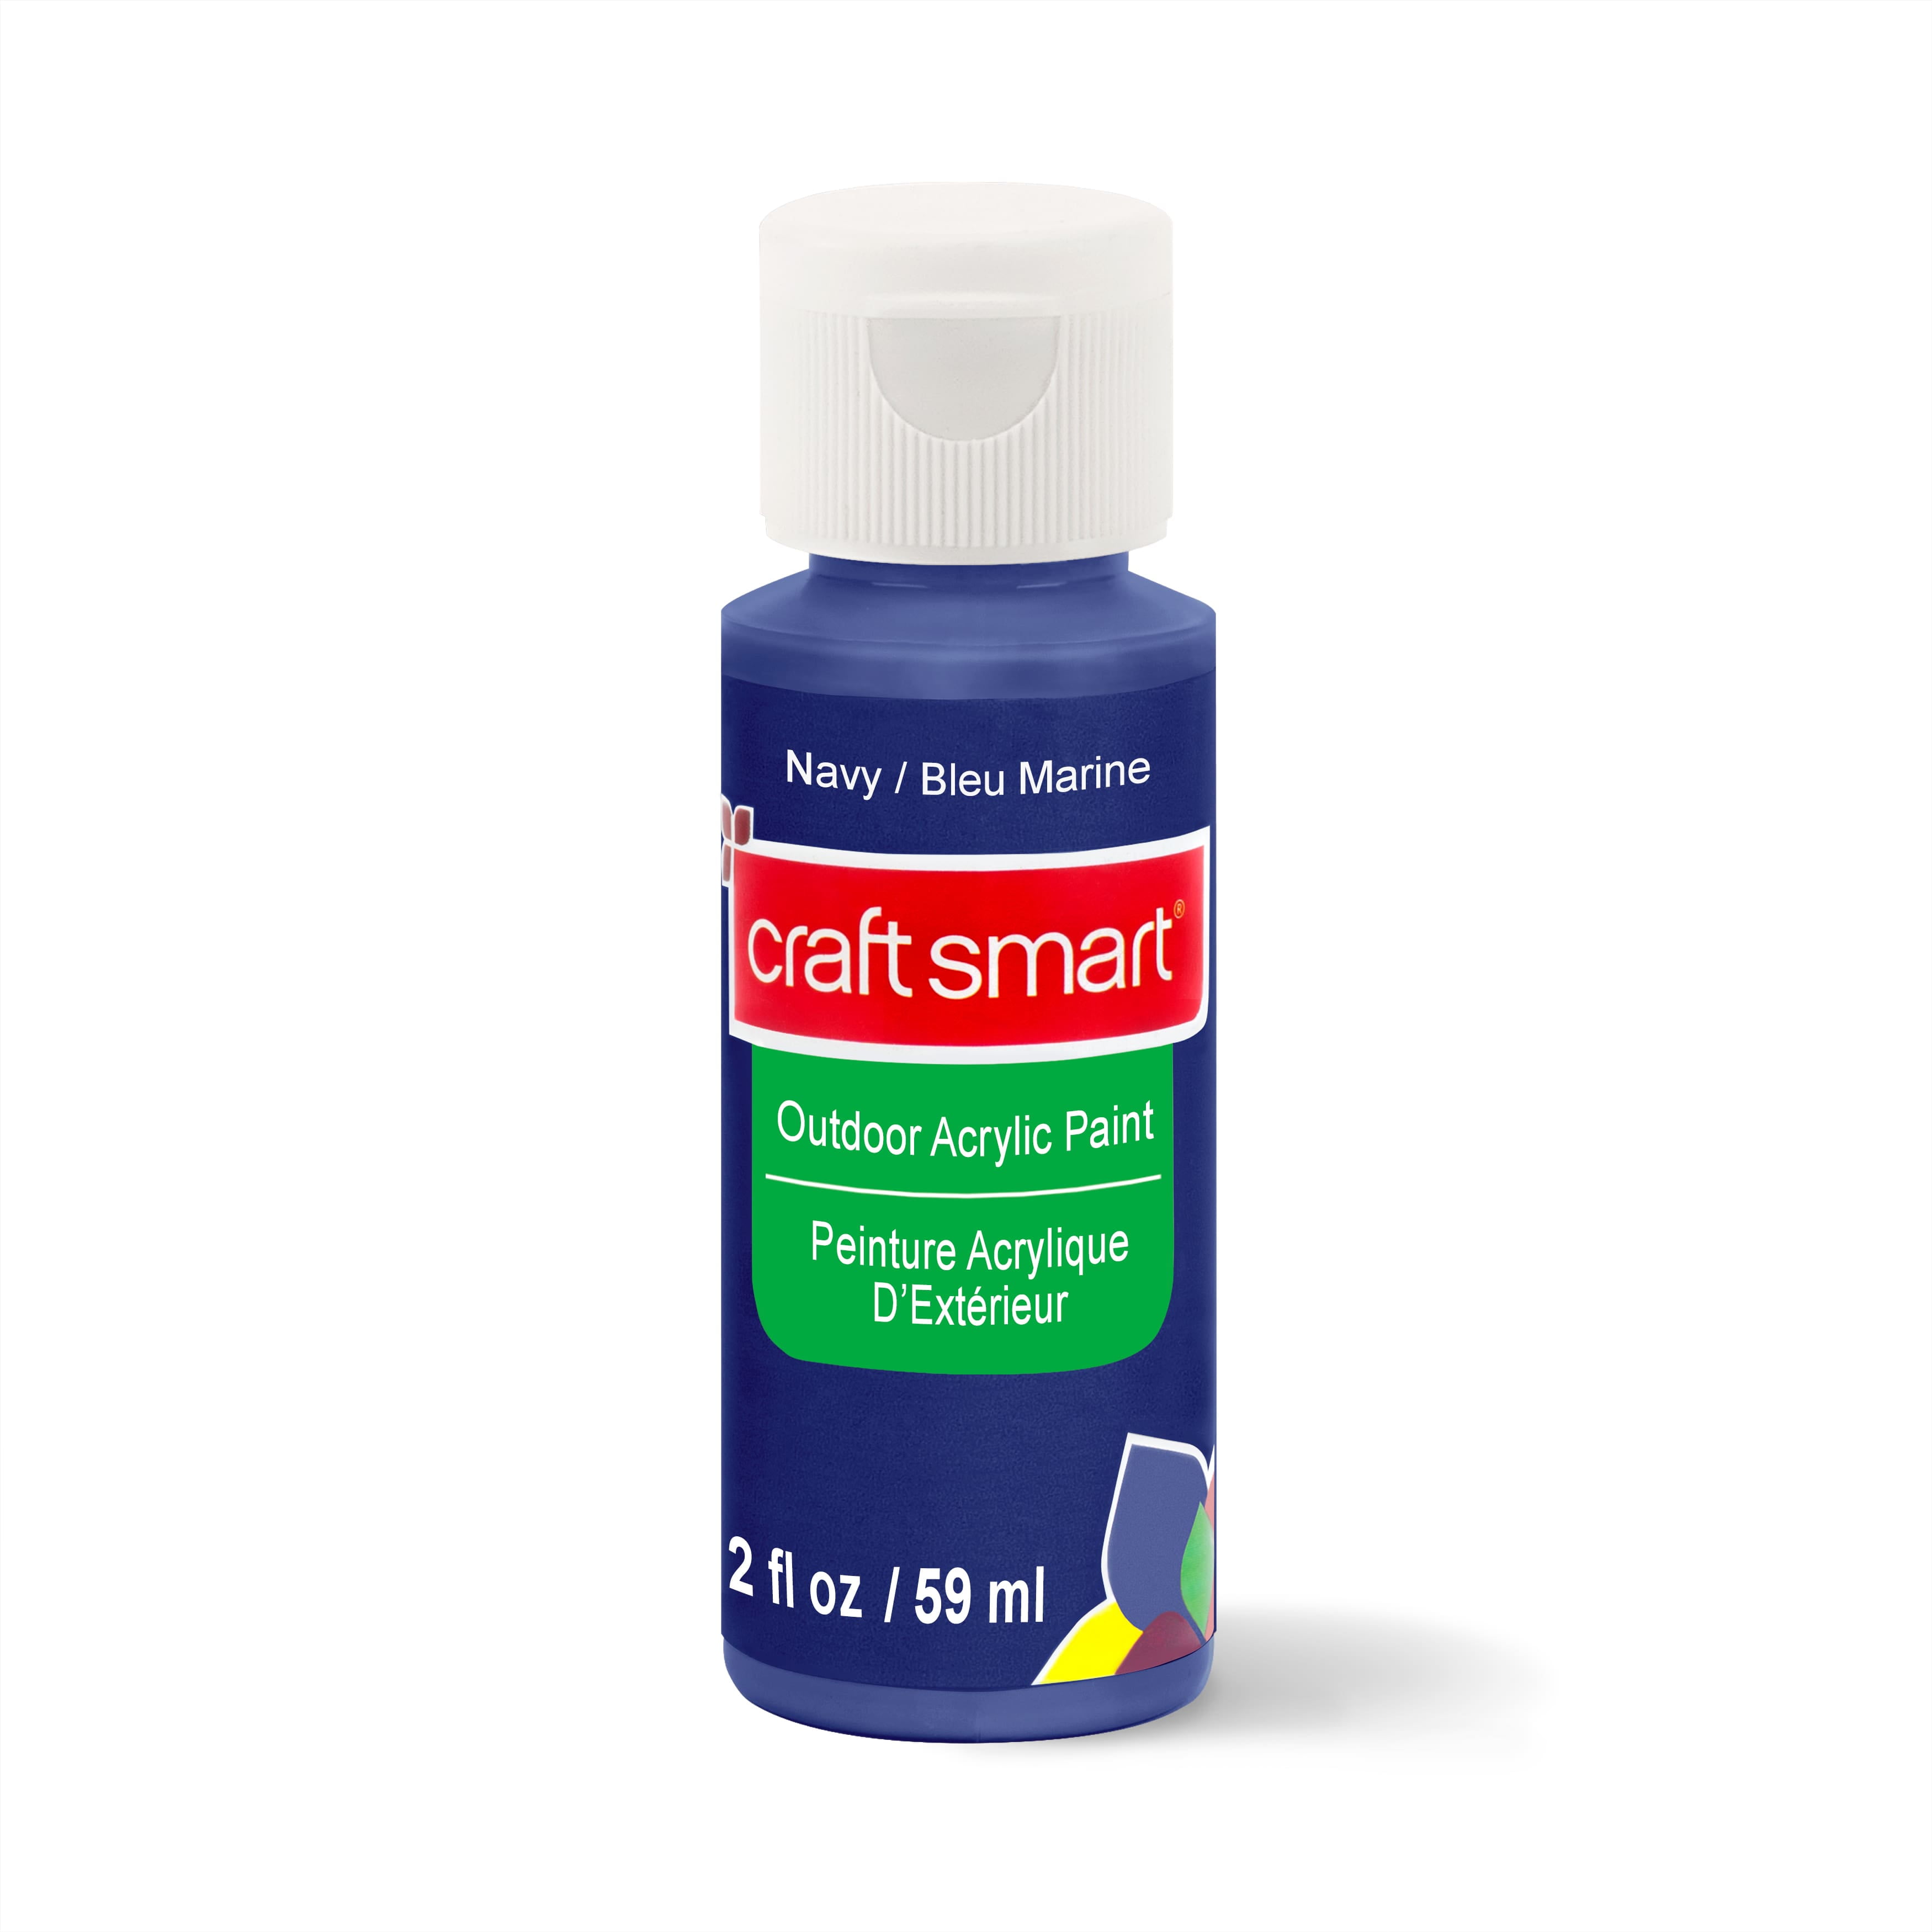 Craft Smart michaels bulk 12 packs: 12 ct. (144 total) acrylic paint value  pack by craft